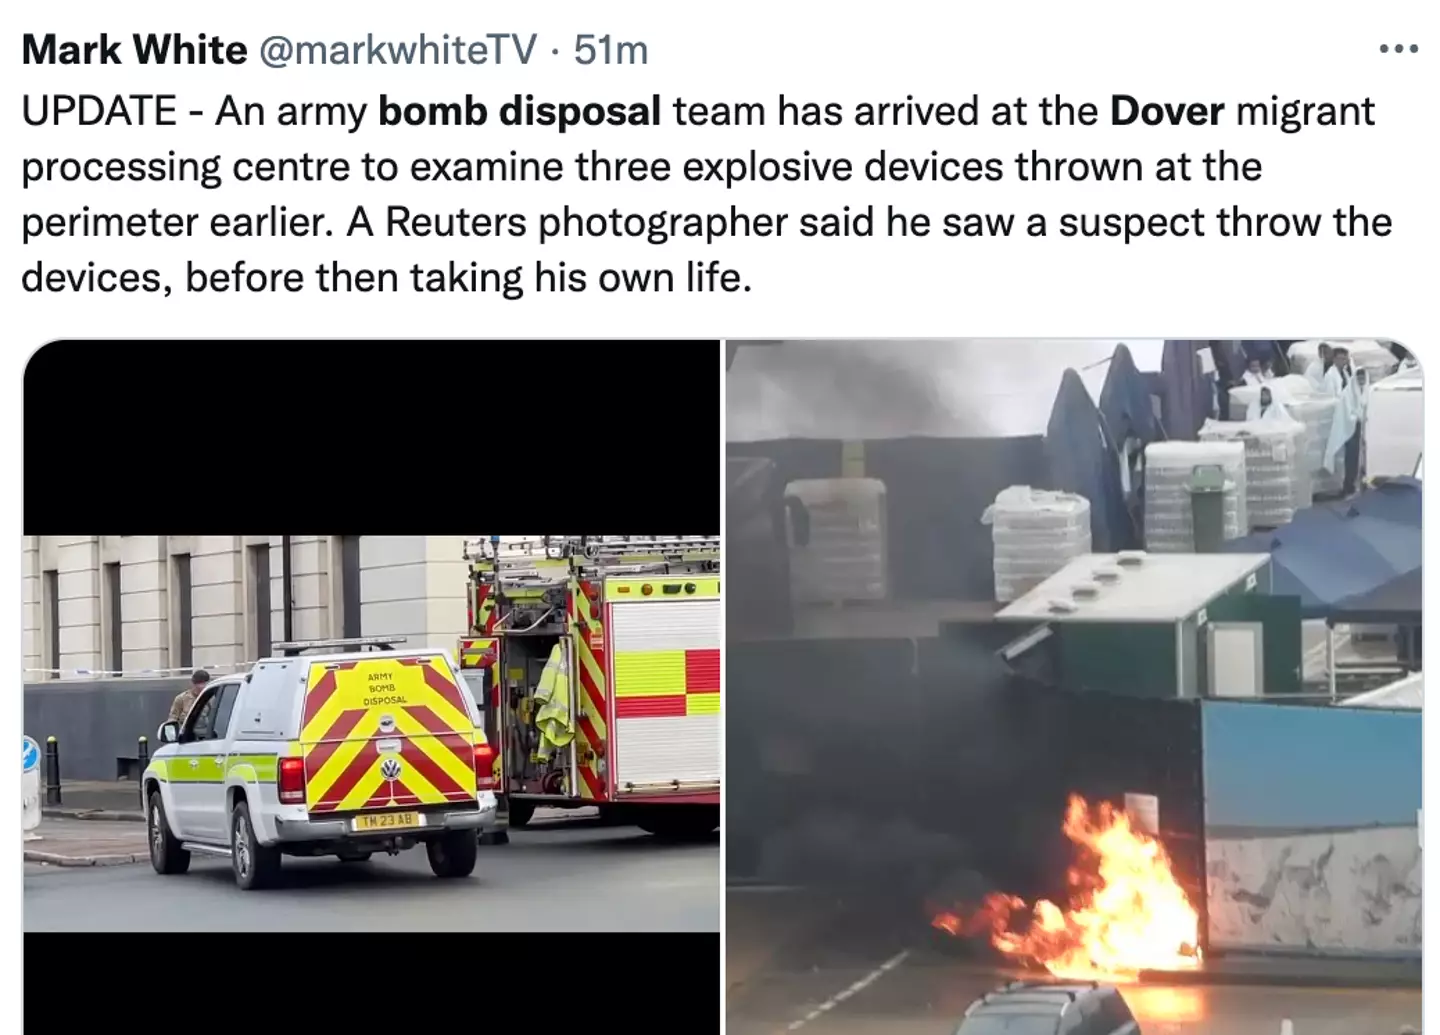 Images show bomb disposal teams arriving at the scene.